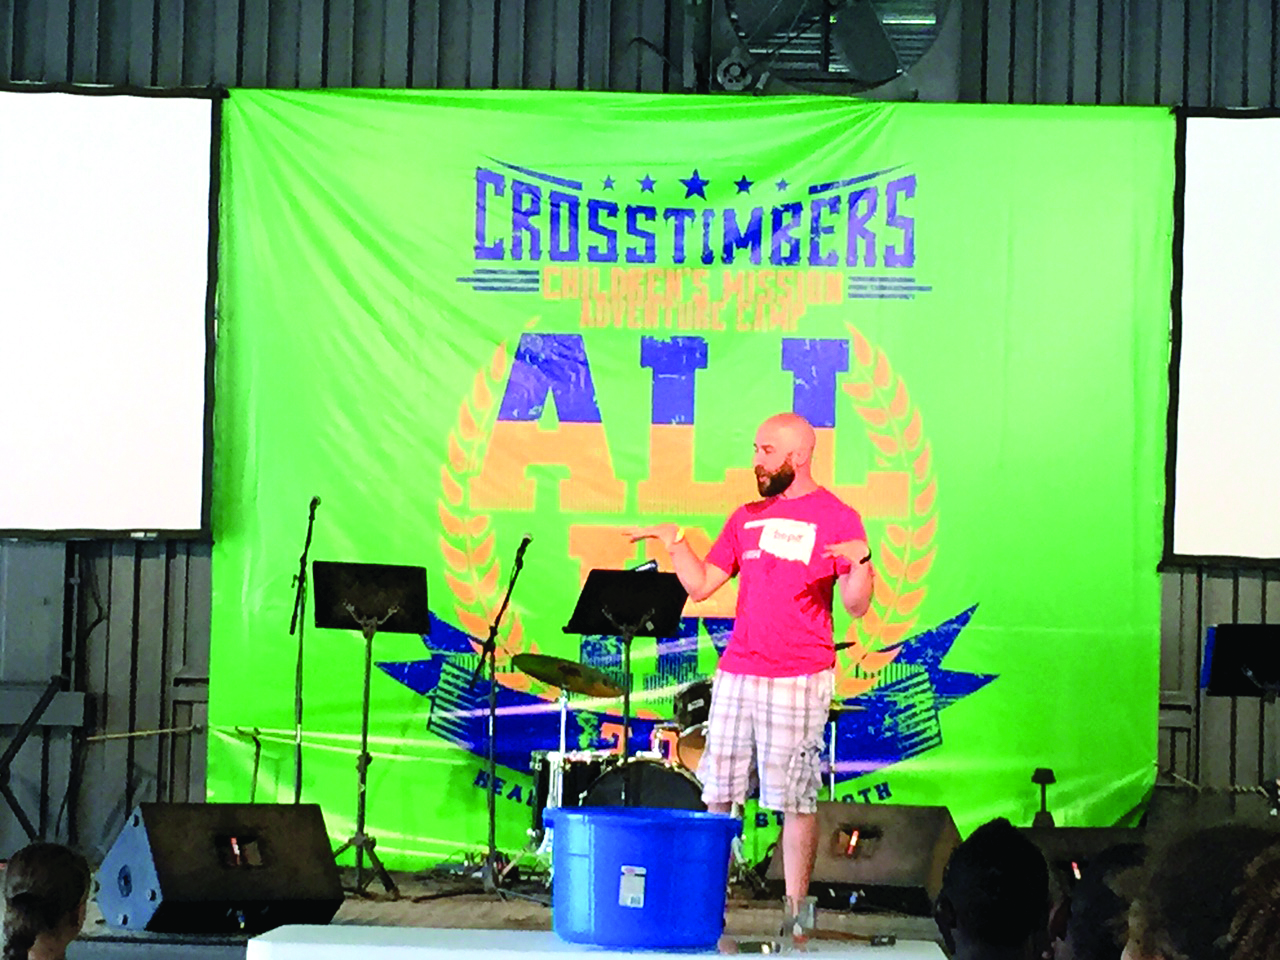 Cameron Whaley, pastor of Yukon, Canadian Valley, served as camp pastor for Session 6 at CrossTimbers. (Photo: Jordan Anson)